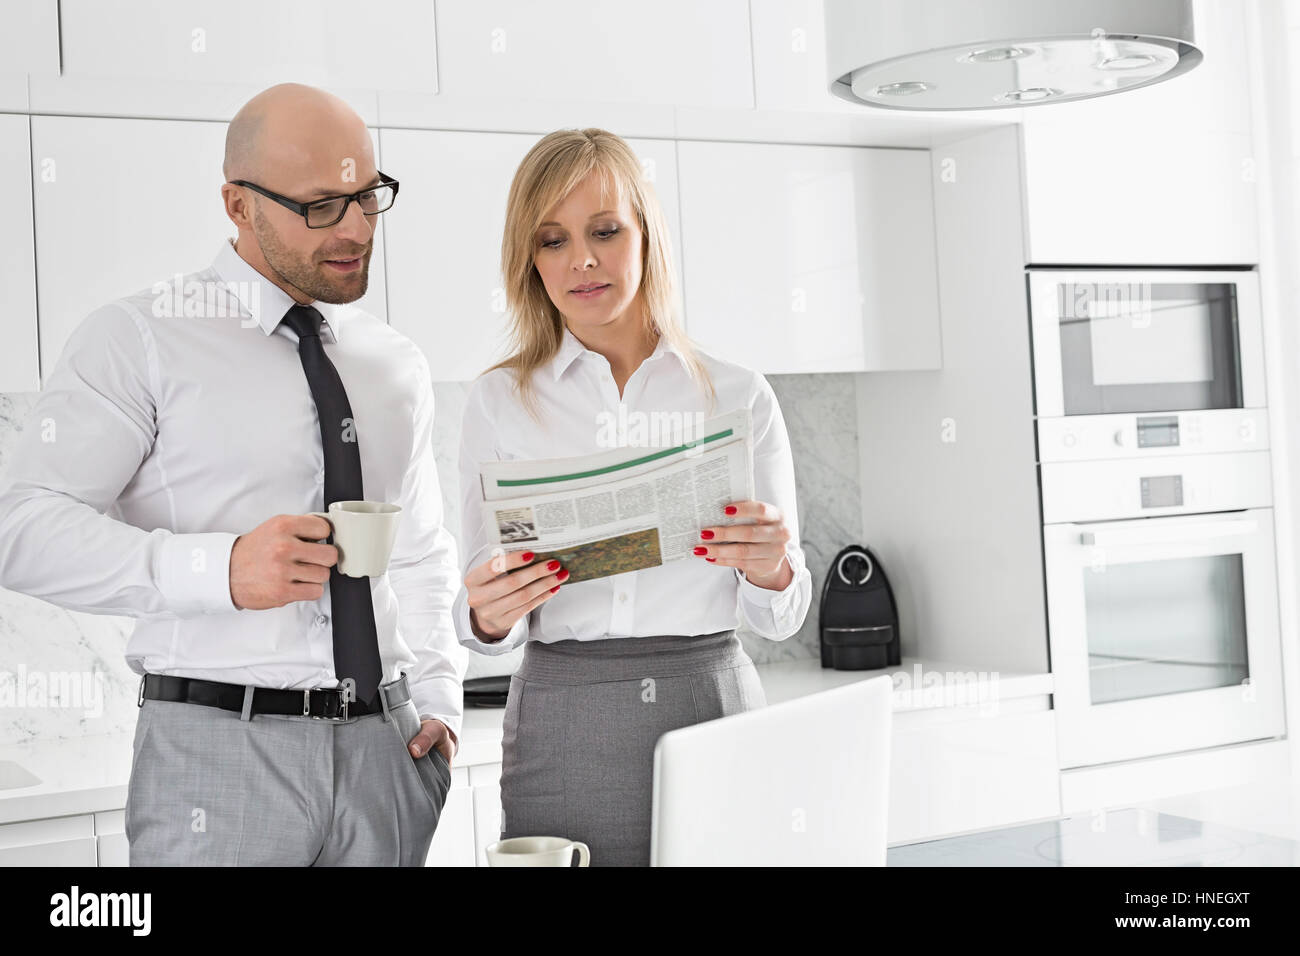 Mid adult business couple reading newspaper while having coffee in kitchen Stock Photo